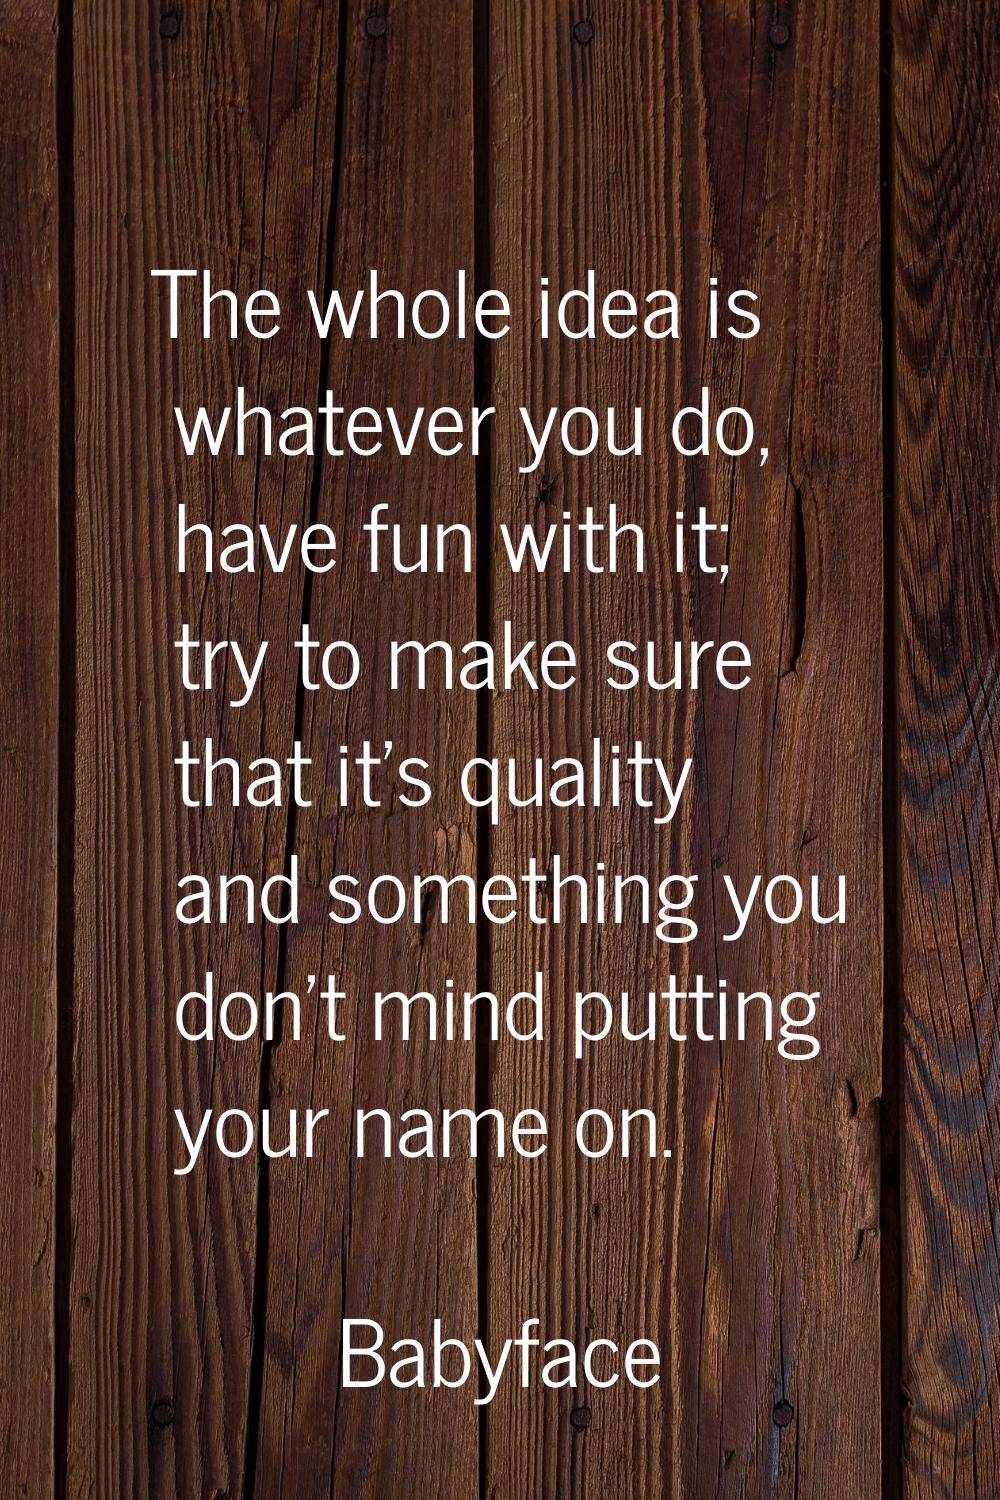 The whole idea is whatever you do, have fun with it; try to make sure that it's quality and somethi